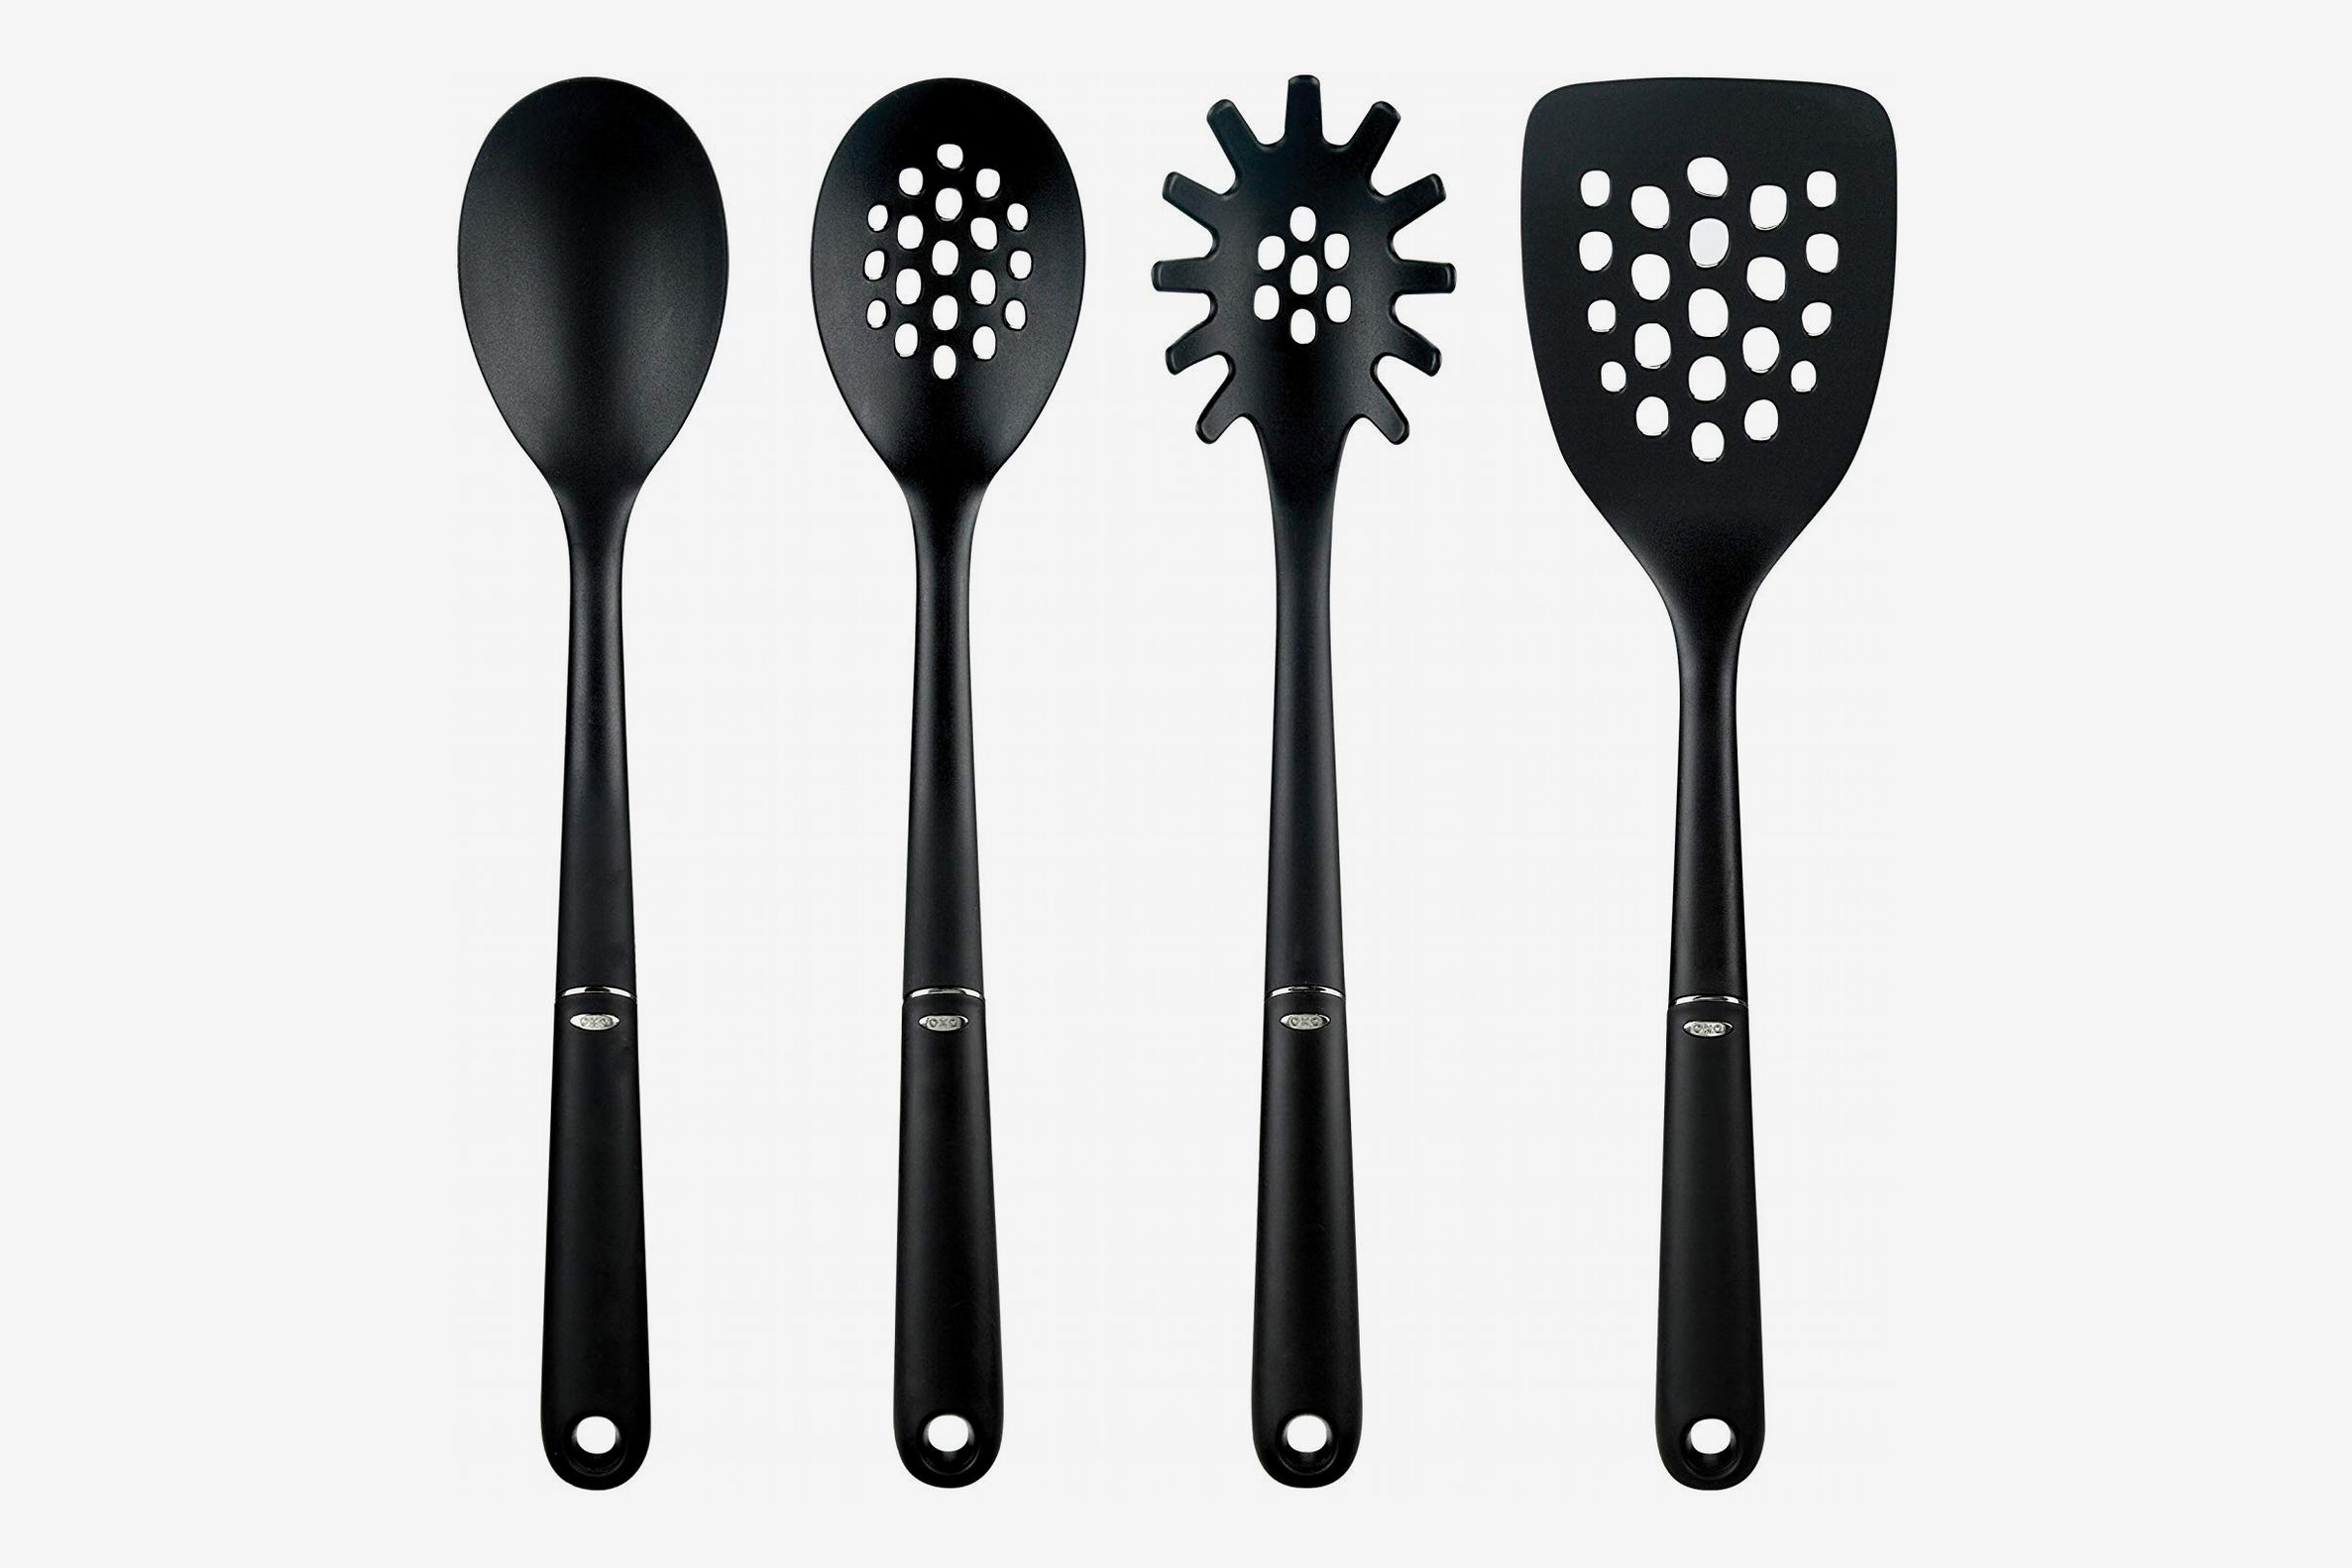 slotted spoon utensil set made of high quality silicone spaghetti spoon and sauce spoon soup ladle Levivo Silicone Kitchen Helper Set 5 piece utensil set with a spatula green/black 